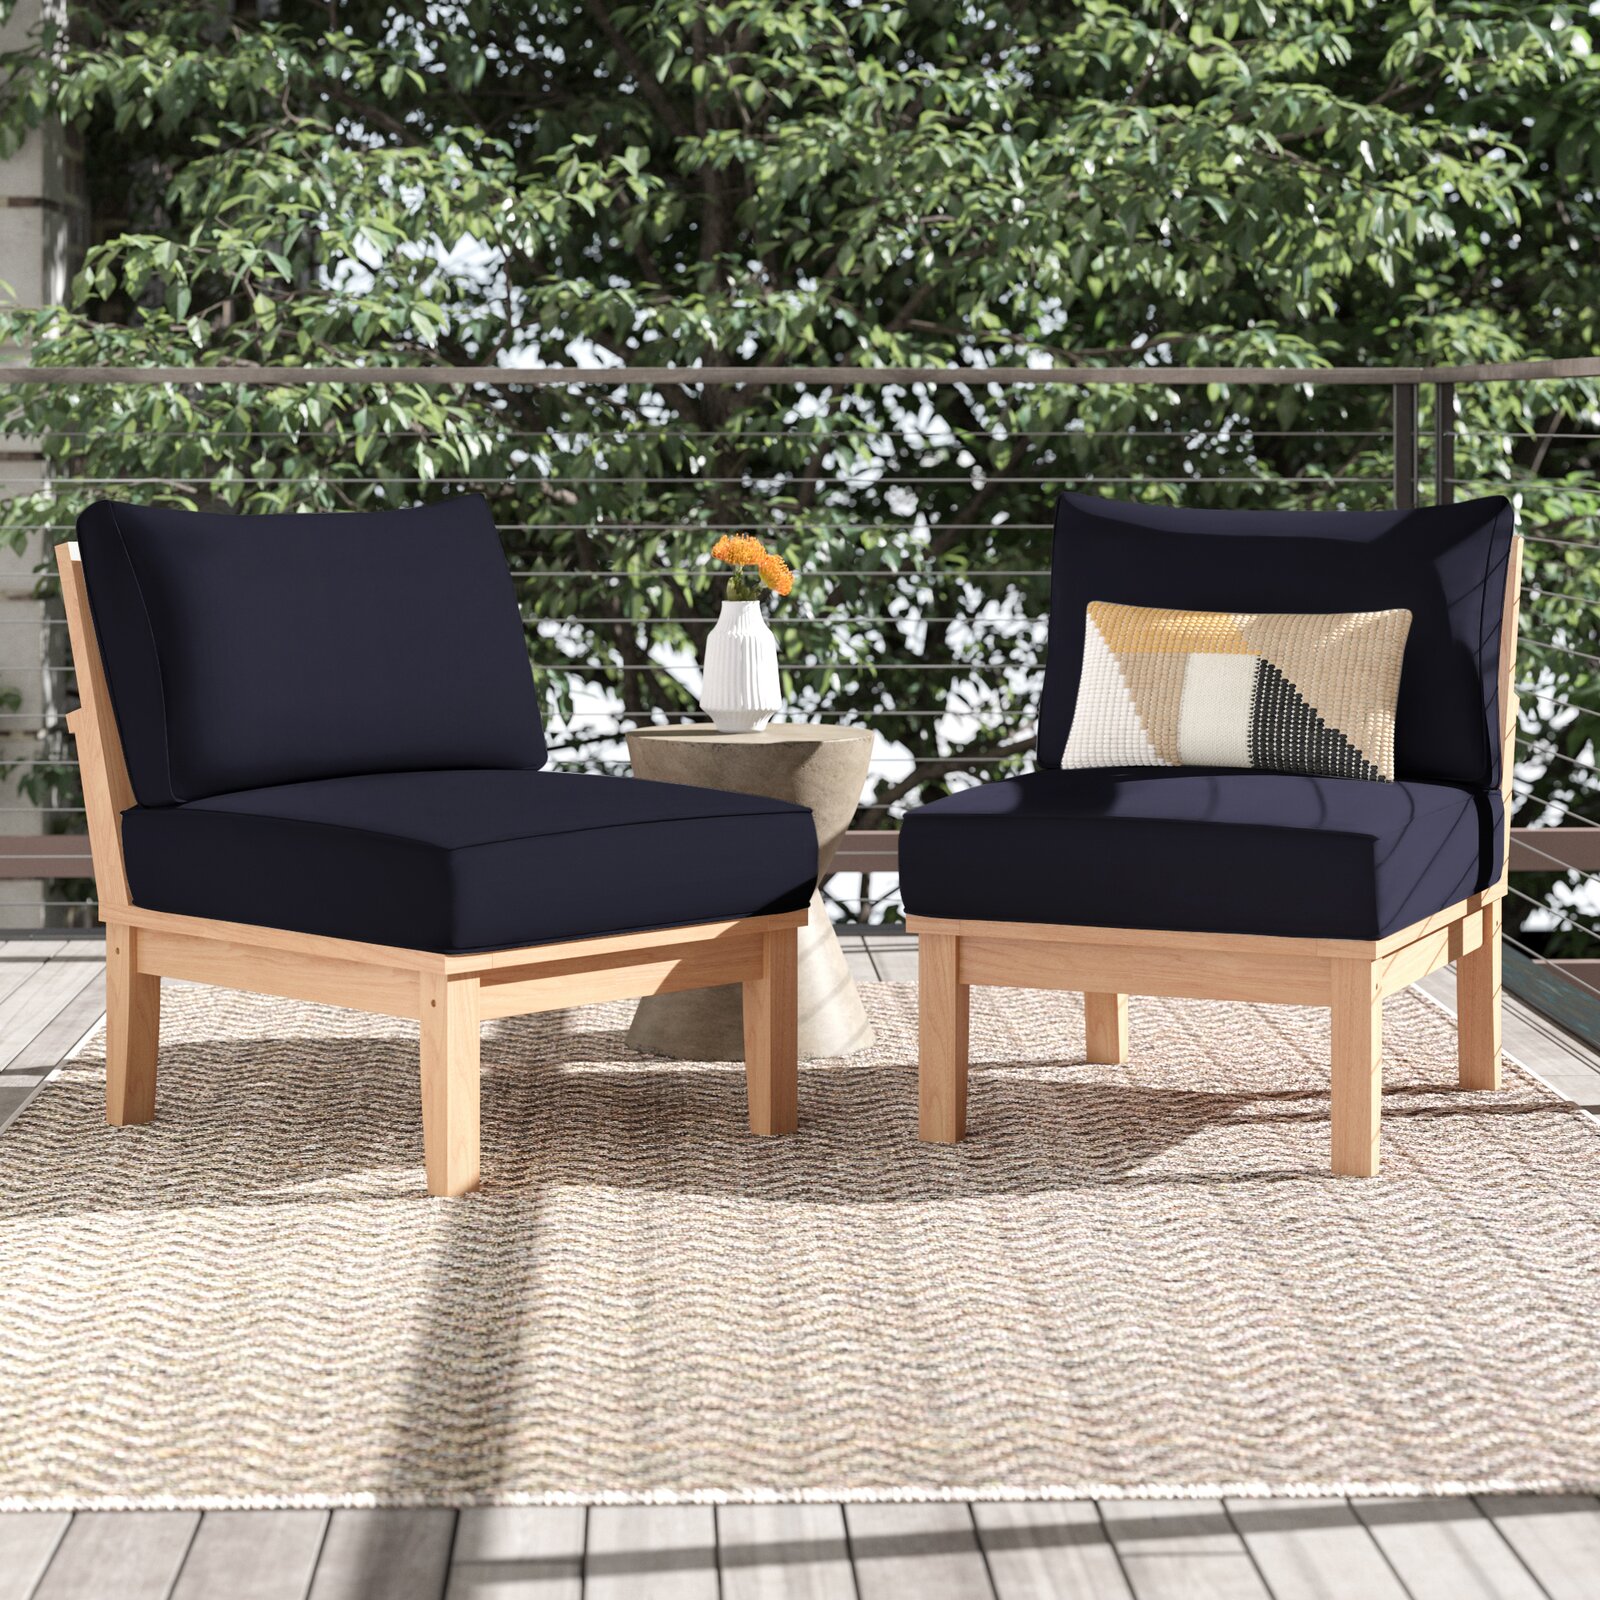 Sand & Stable Sidney Outdoor Teak Patio Chair with Cushions